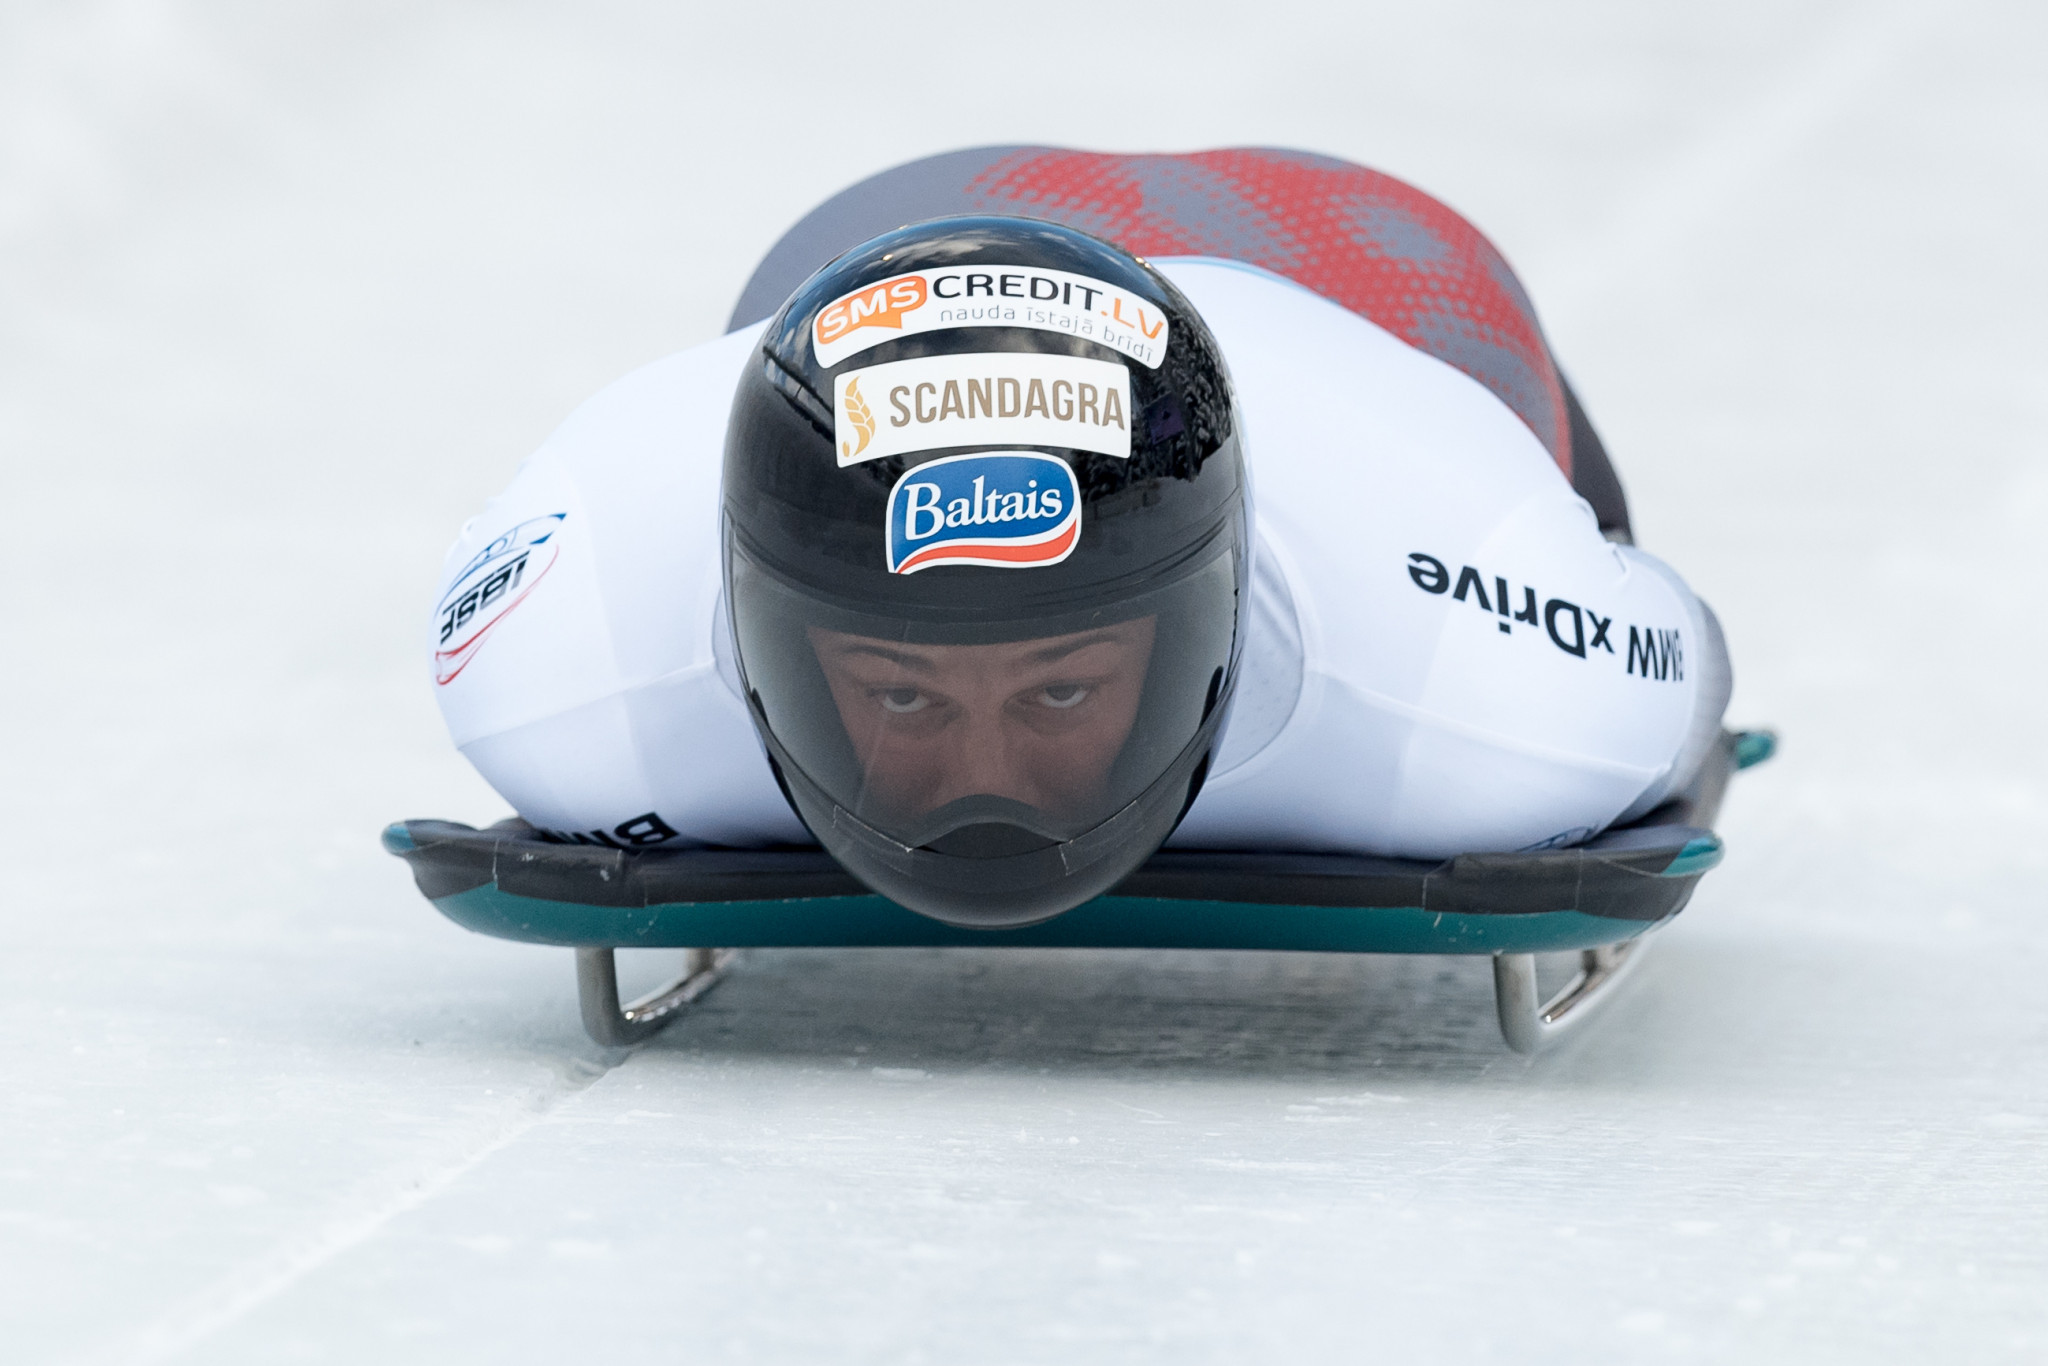 Dukurs favourite to win another Skeleton World Cup overall title after Yun withdraws